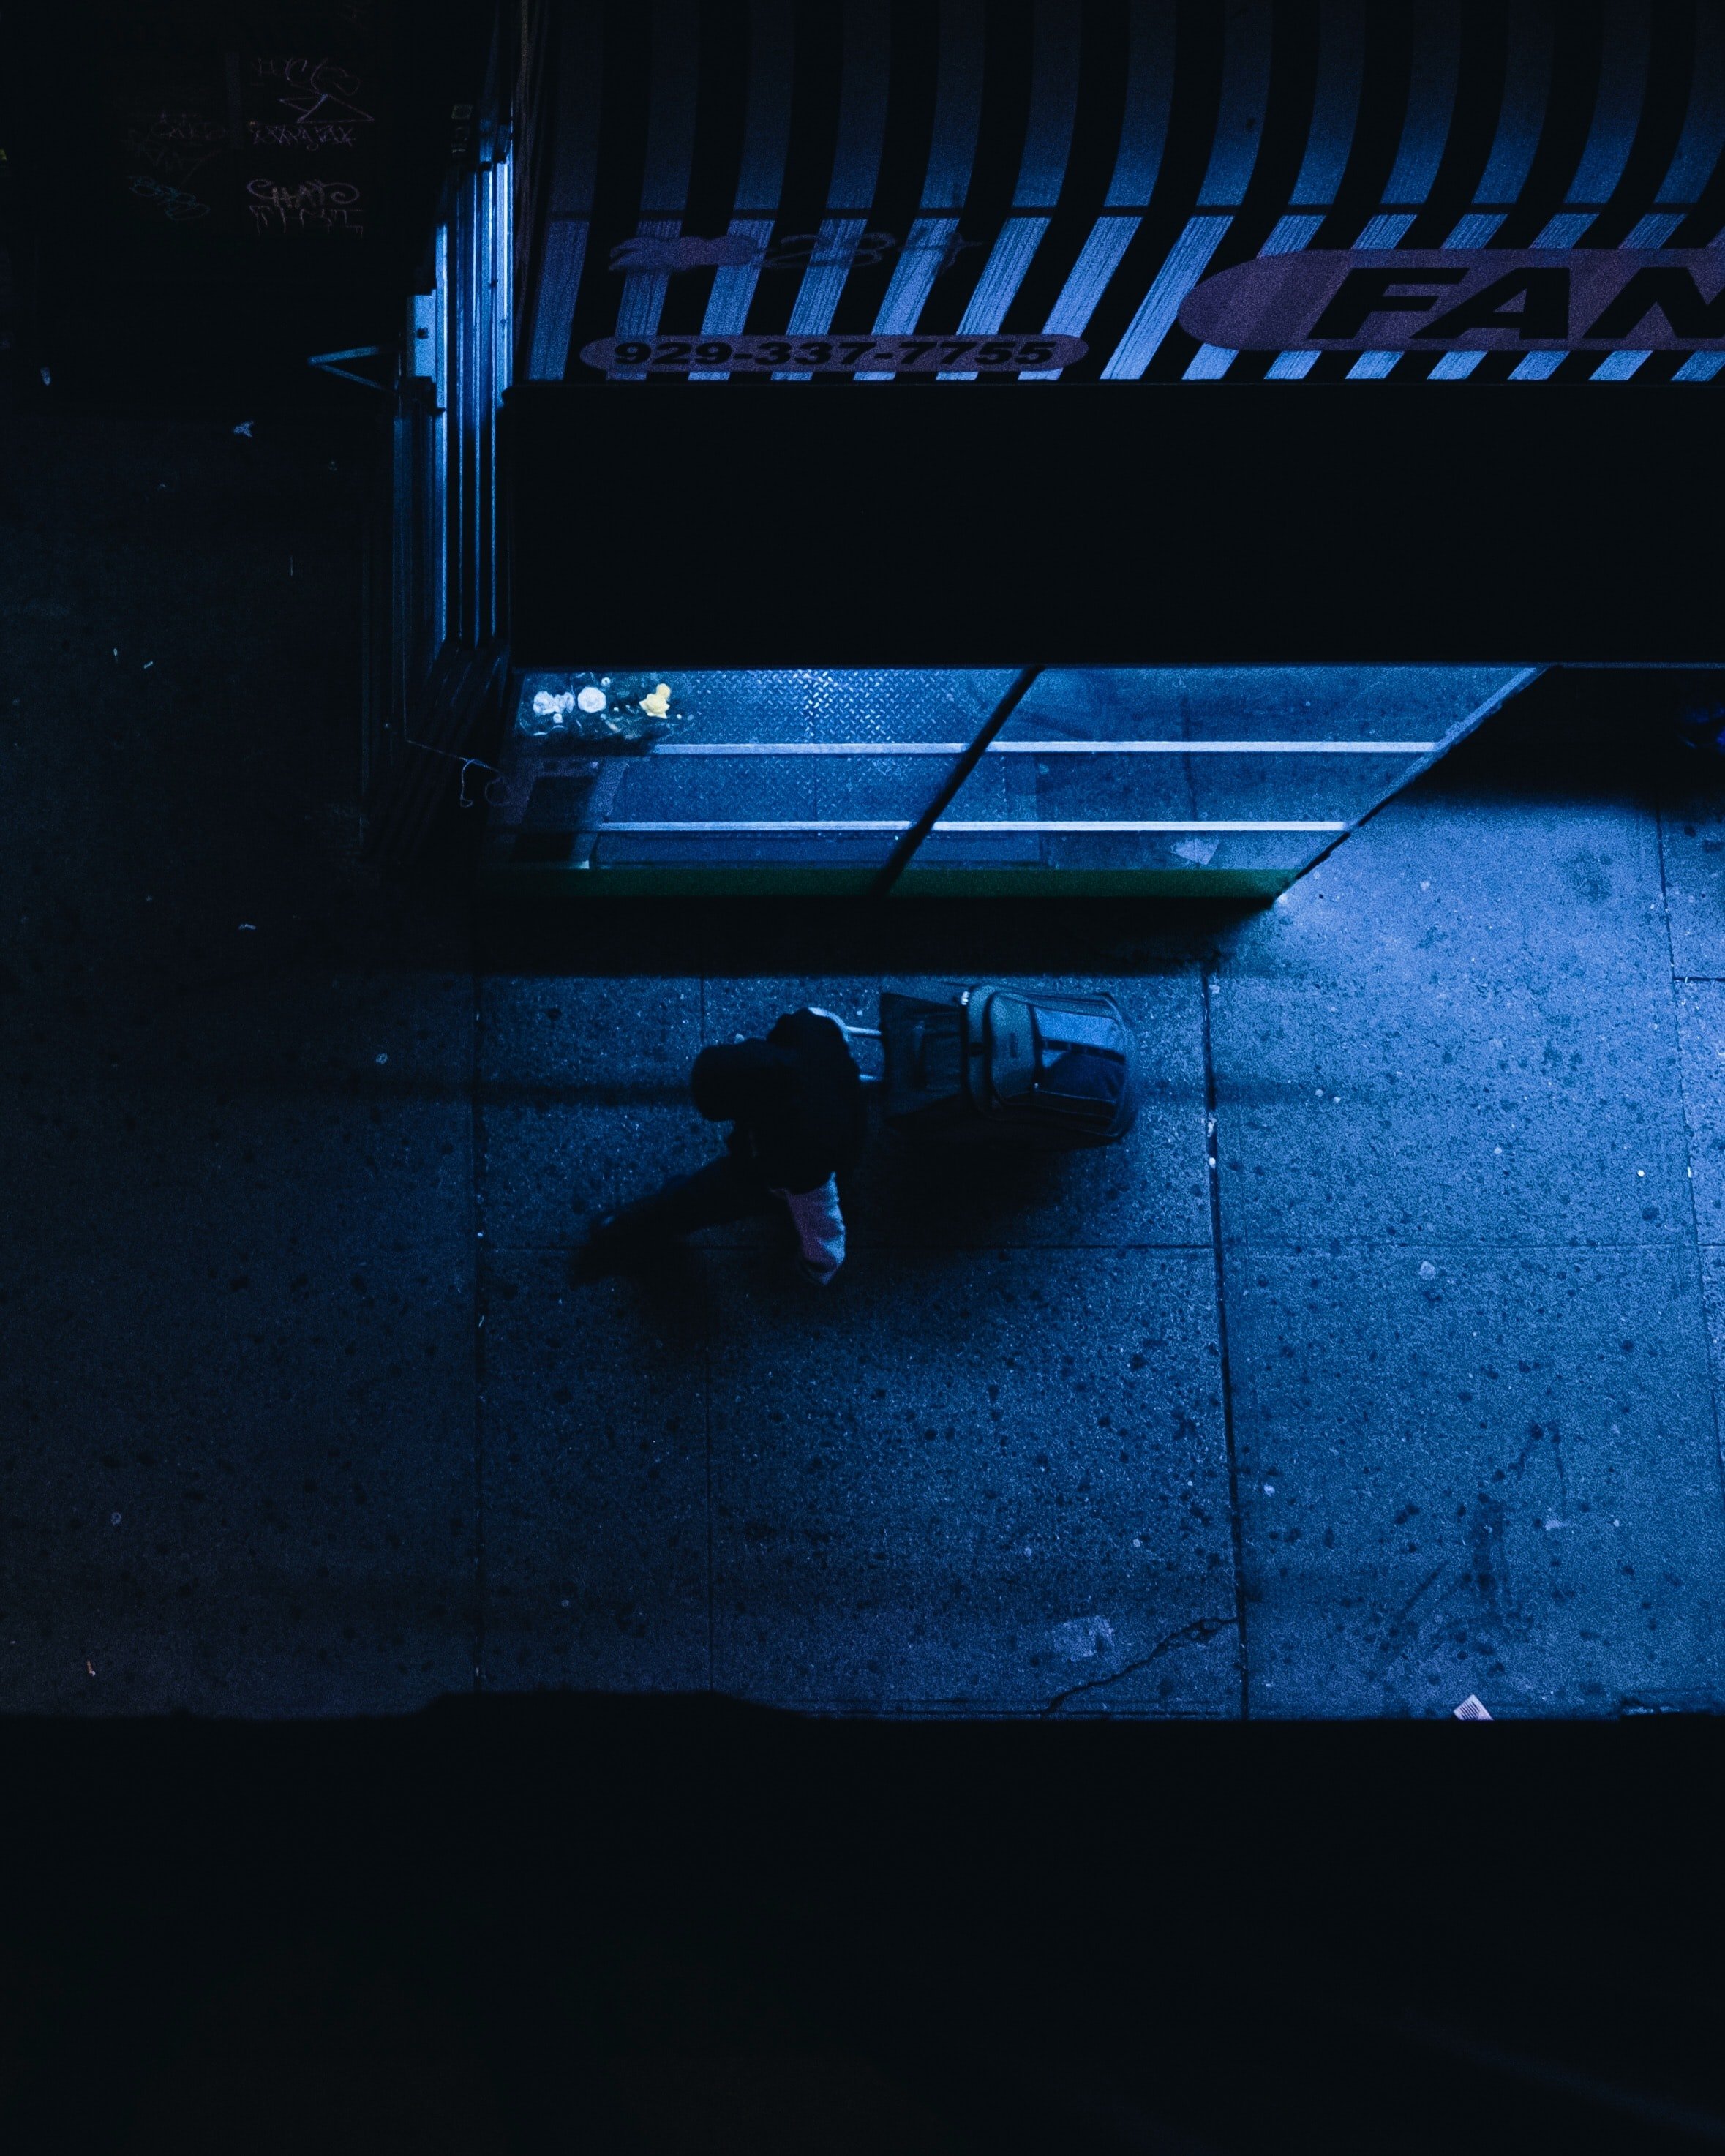 Georgina was robbed at the bus station. | Source: Unsplash